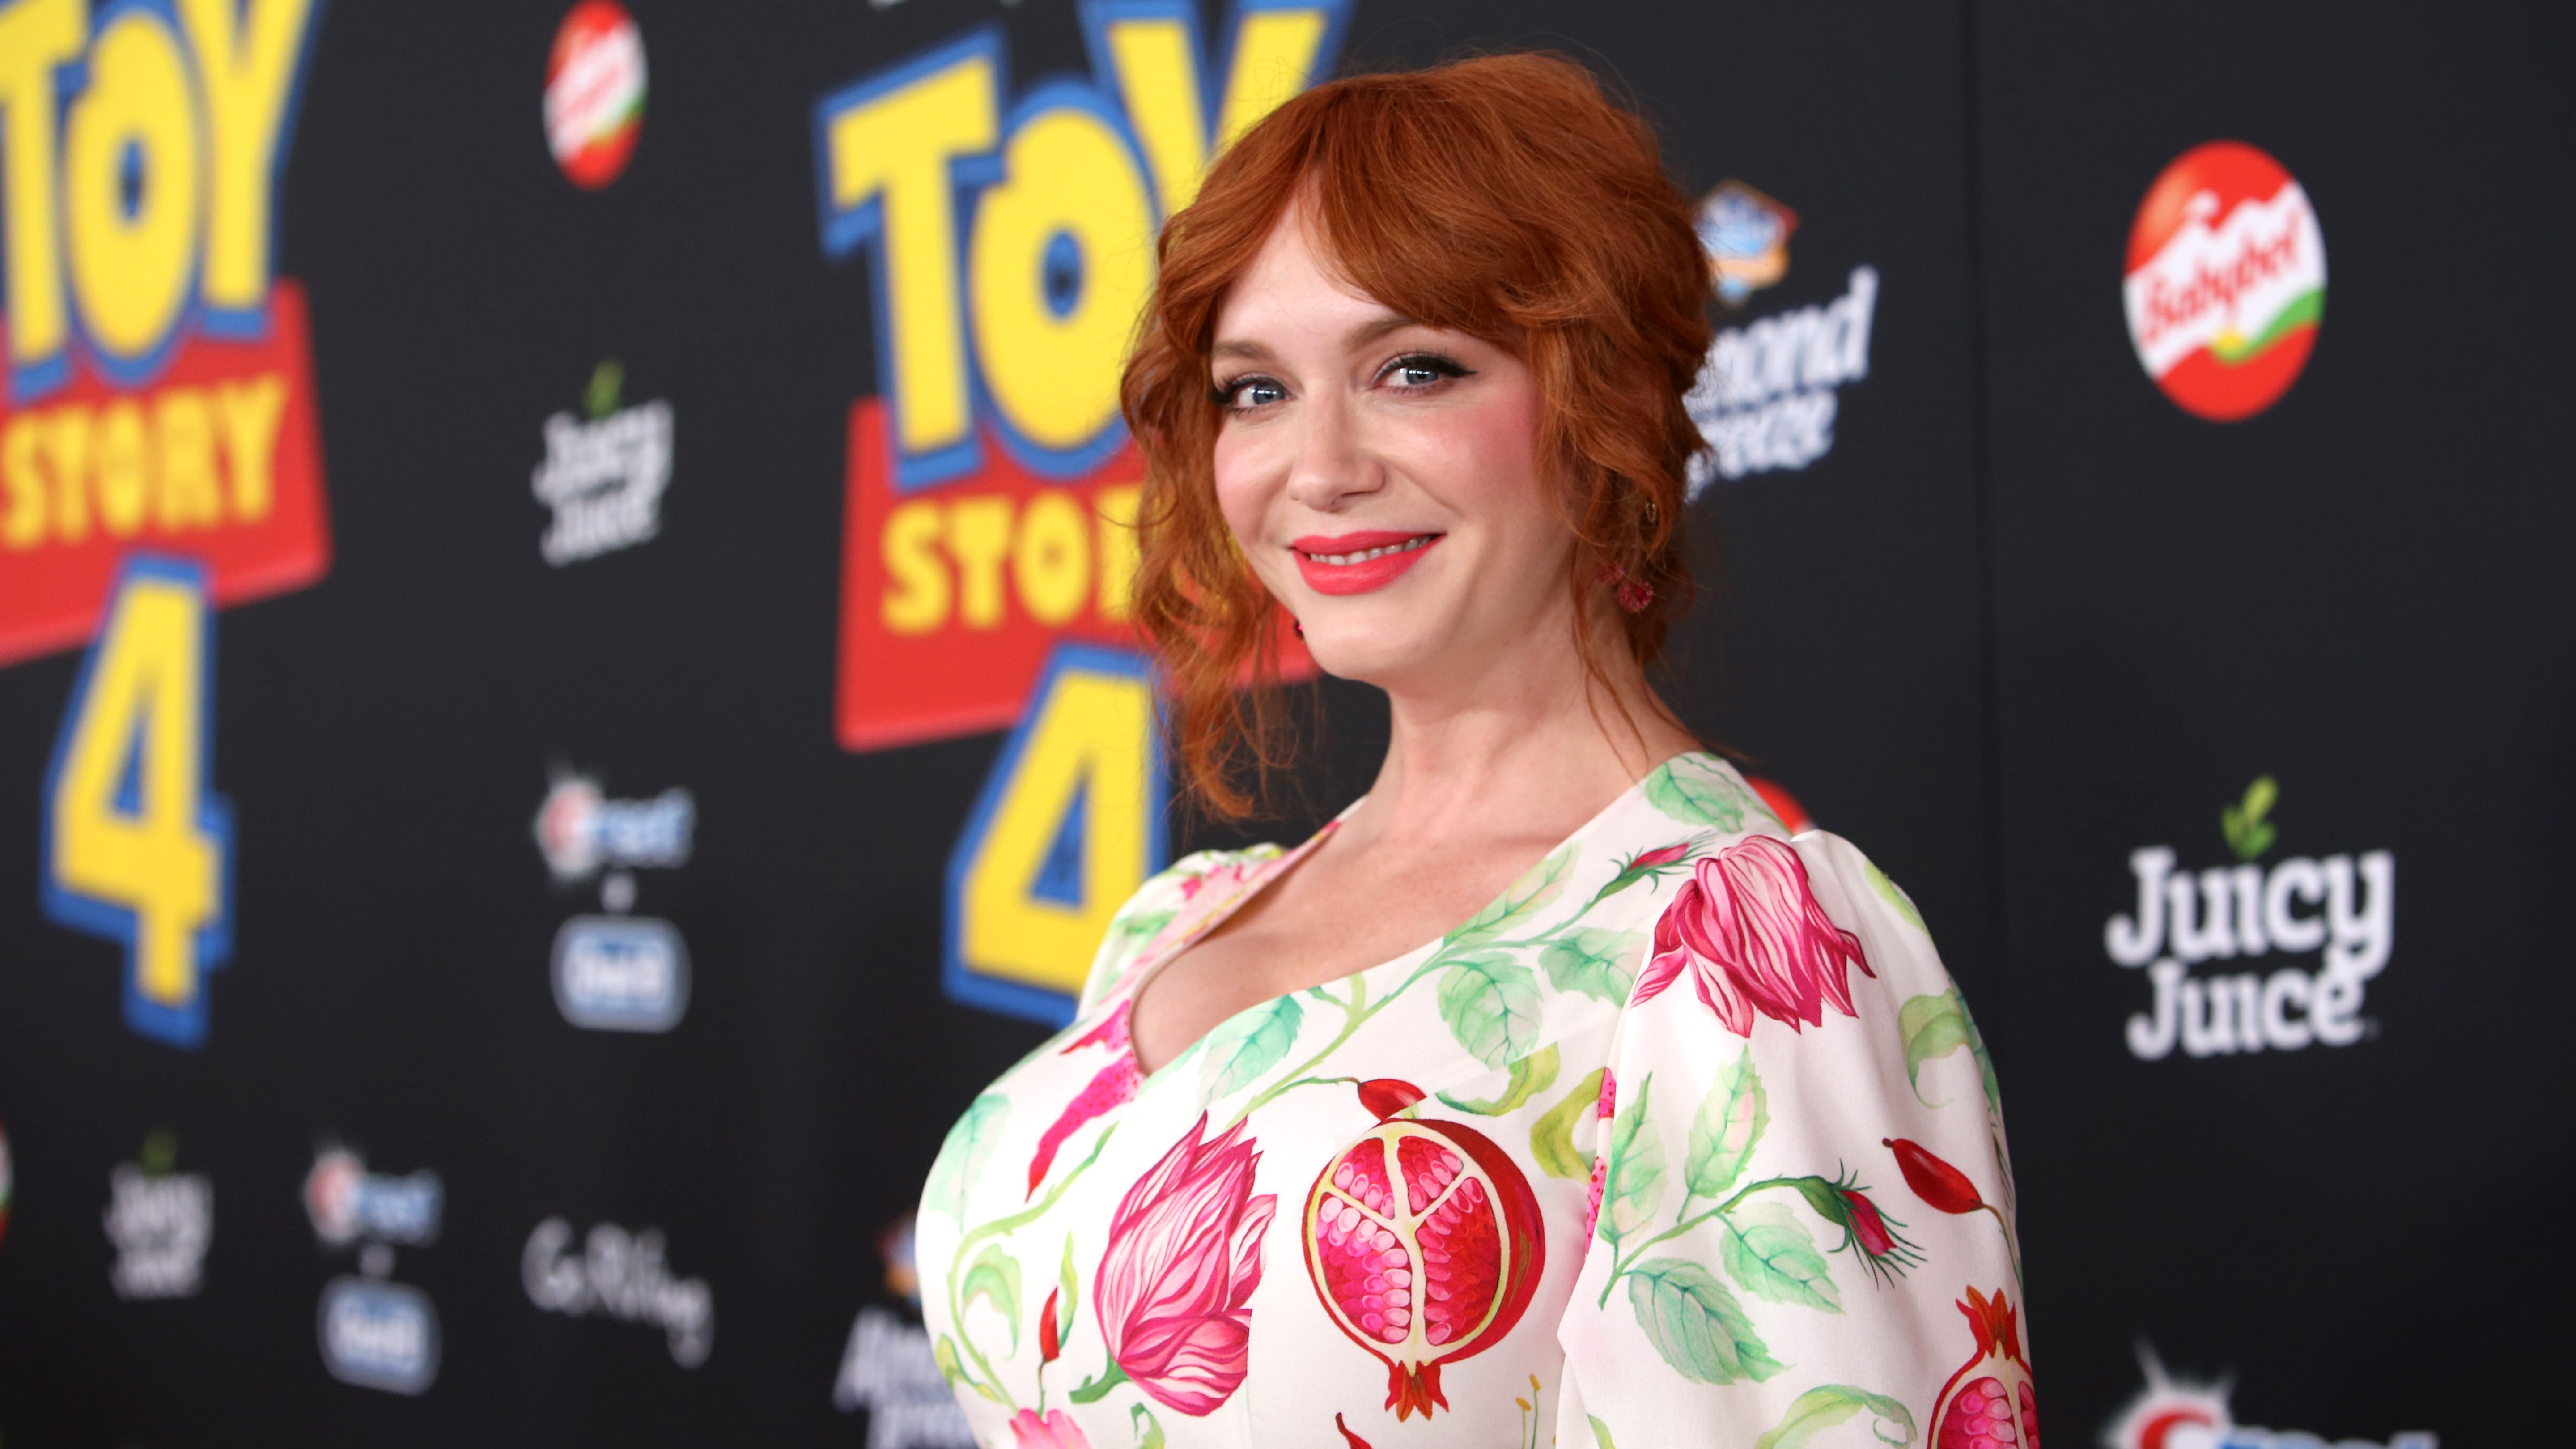 danielle brittle recommends christina hendricks boobs real pic